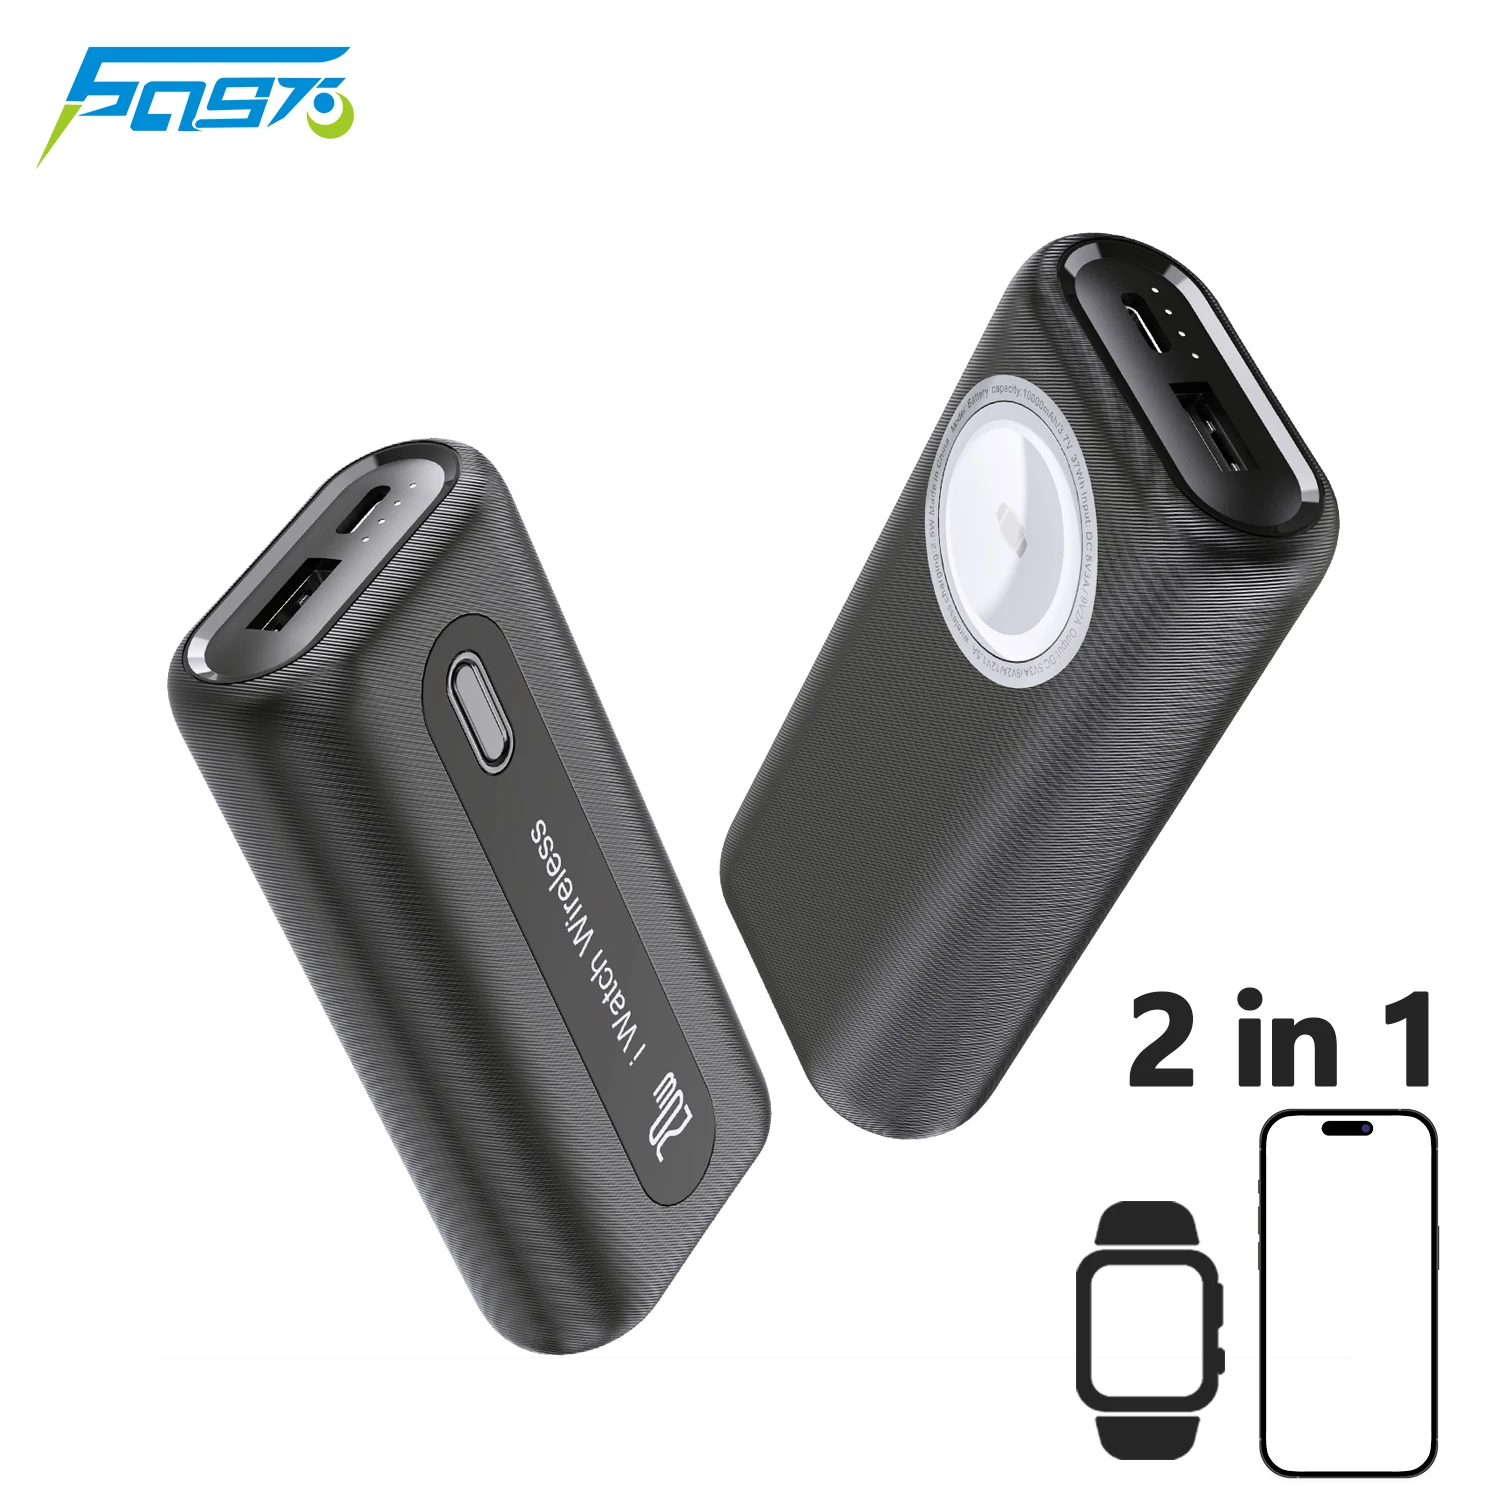 power-bank-10000mah-portable-chargers-20w-fast-charger-powerbank-spare-battery-pack-fast-charging-apple-watch-external-battery